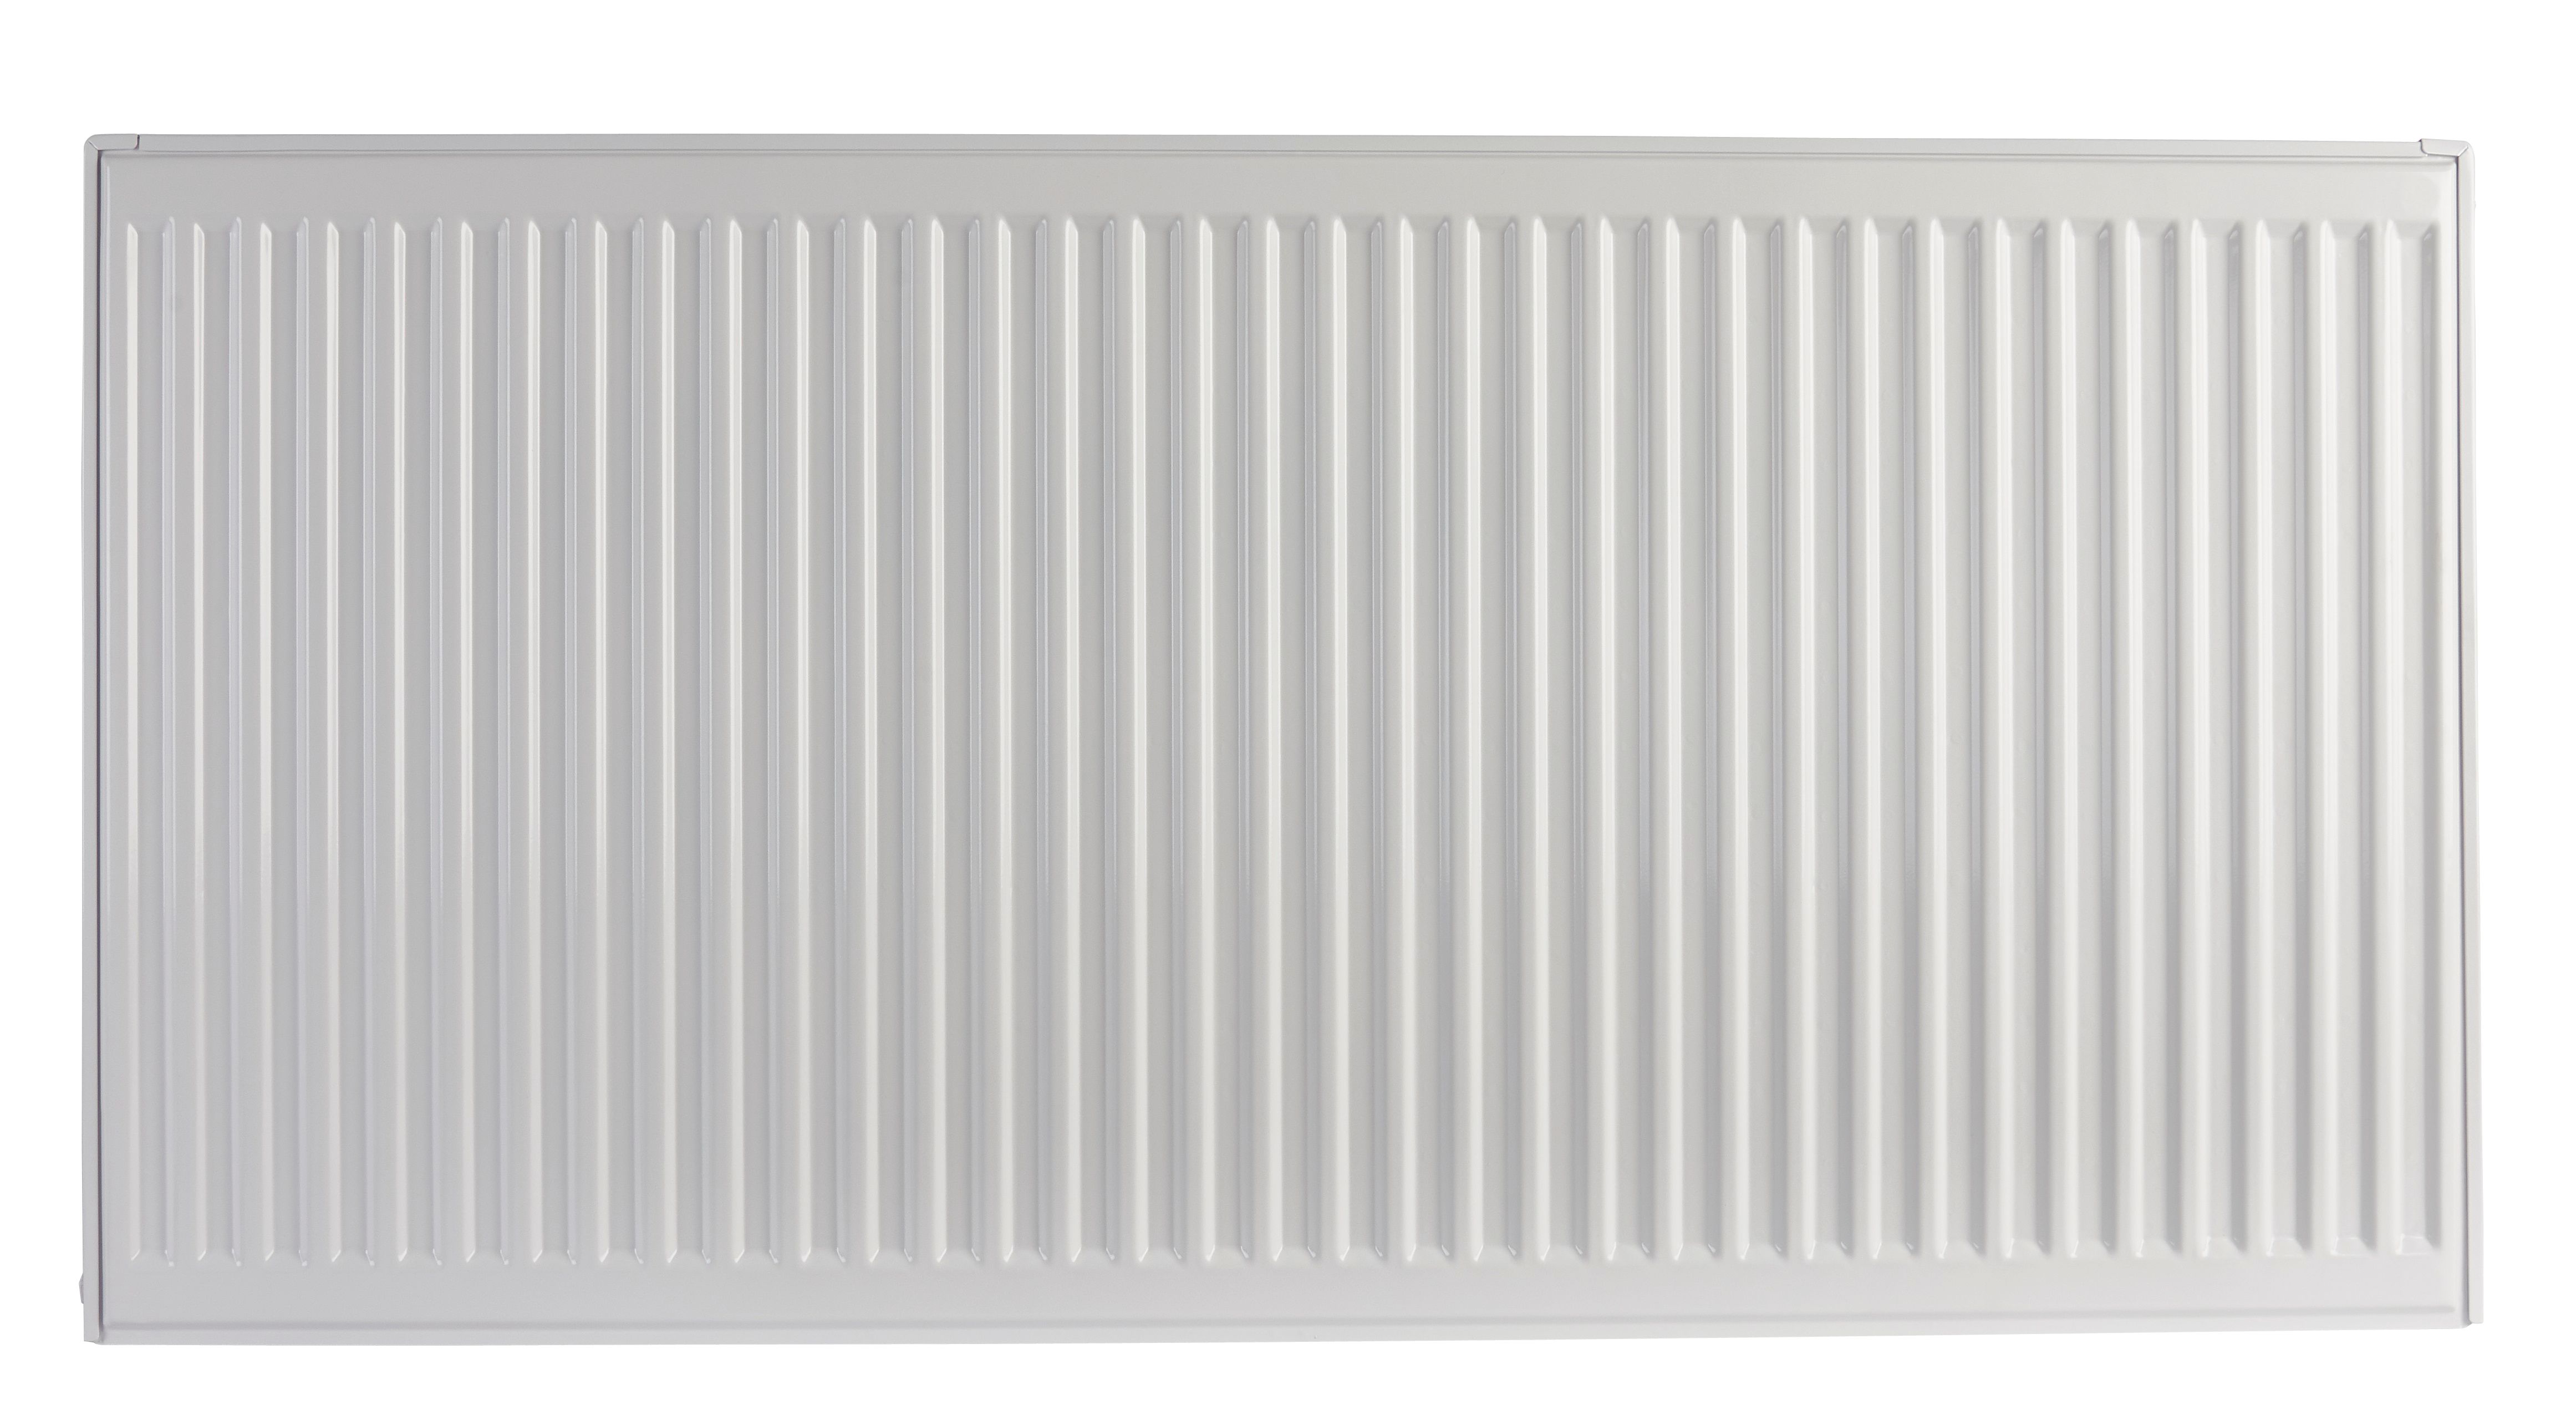 Image of Homeline by Stelrad 500 x 1000mm Type 11 Single Panel Single Convector Radiator